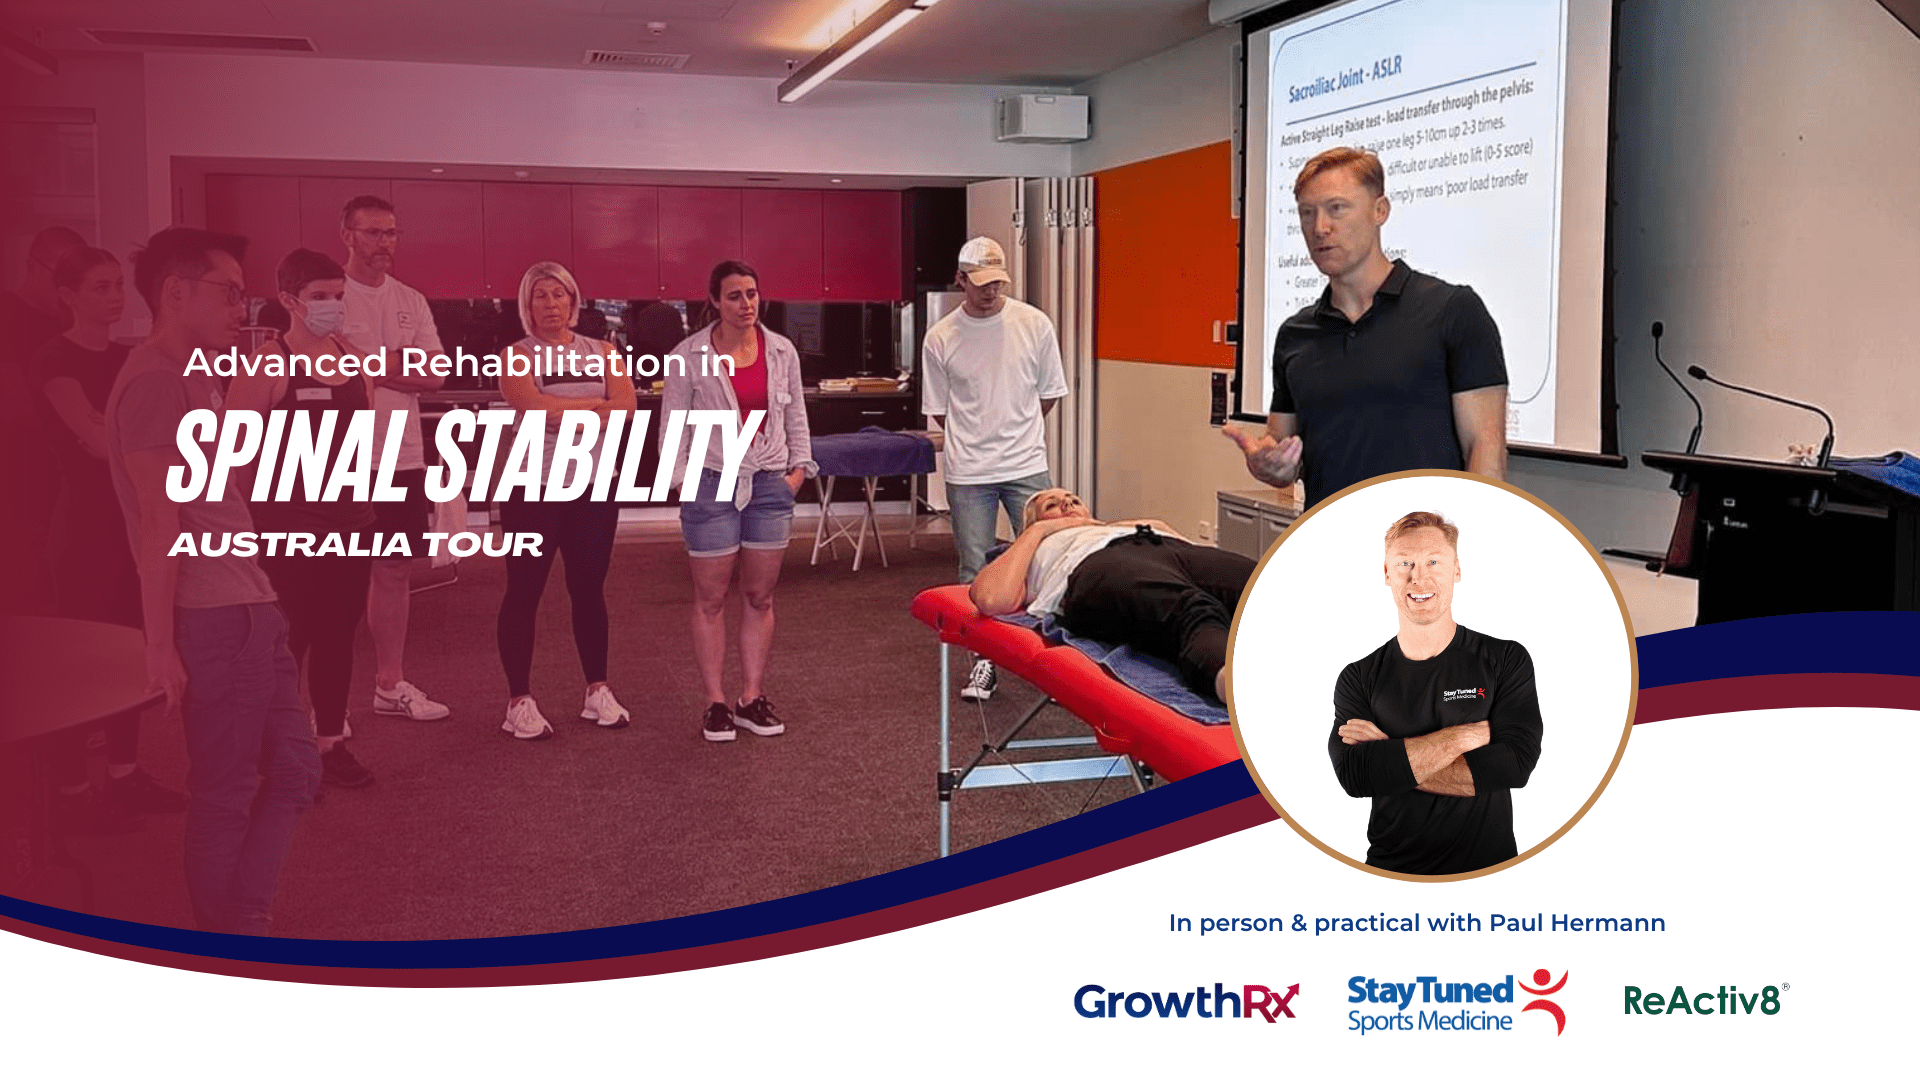 Mastering<br />
Spinal Stability - Paul Hermann